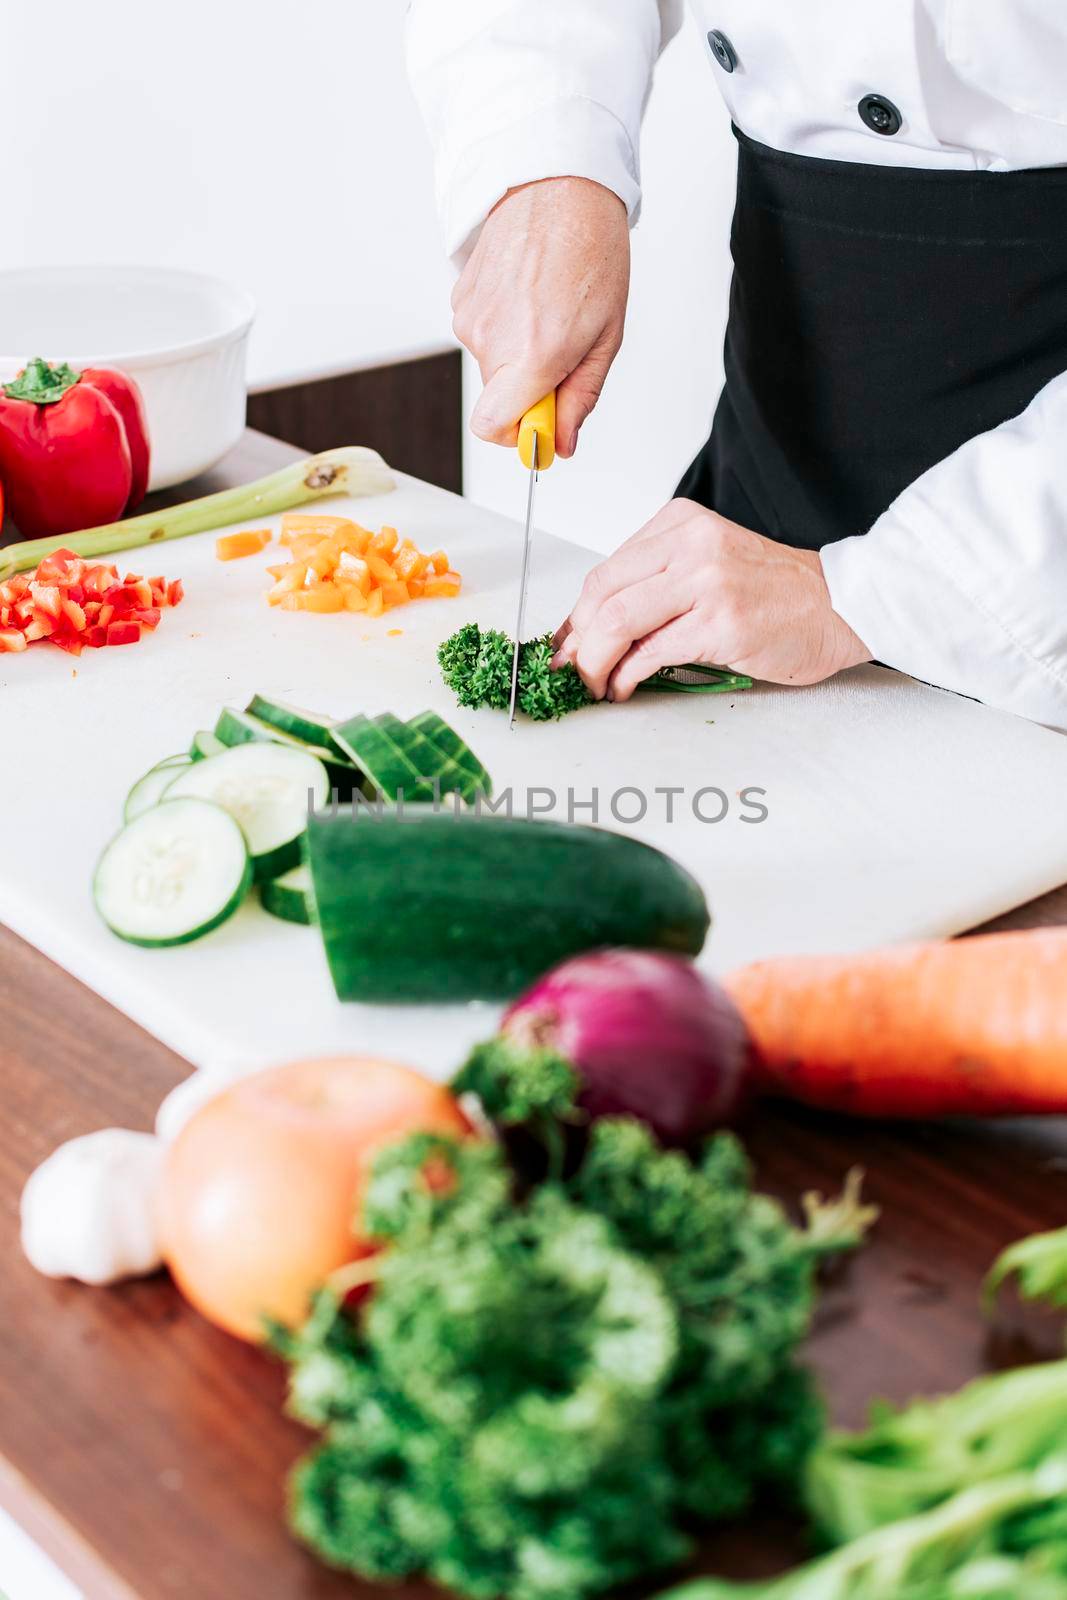 Hands of female chef cutting vegetables, chef hands preparing and cutting vegetables, Close up of a female chef cutting vegetables